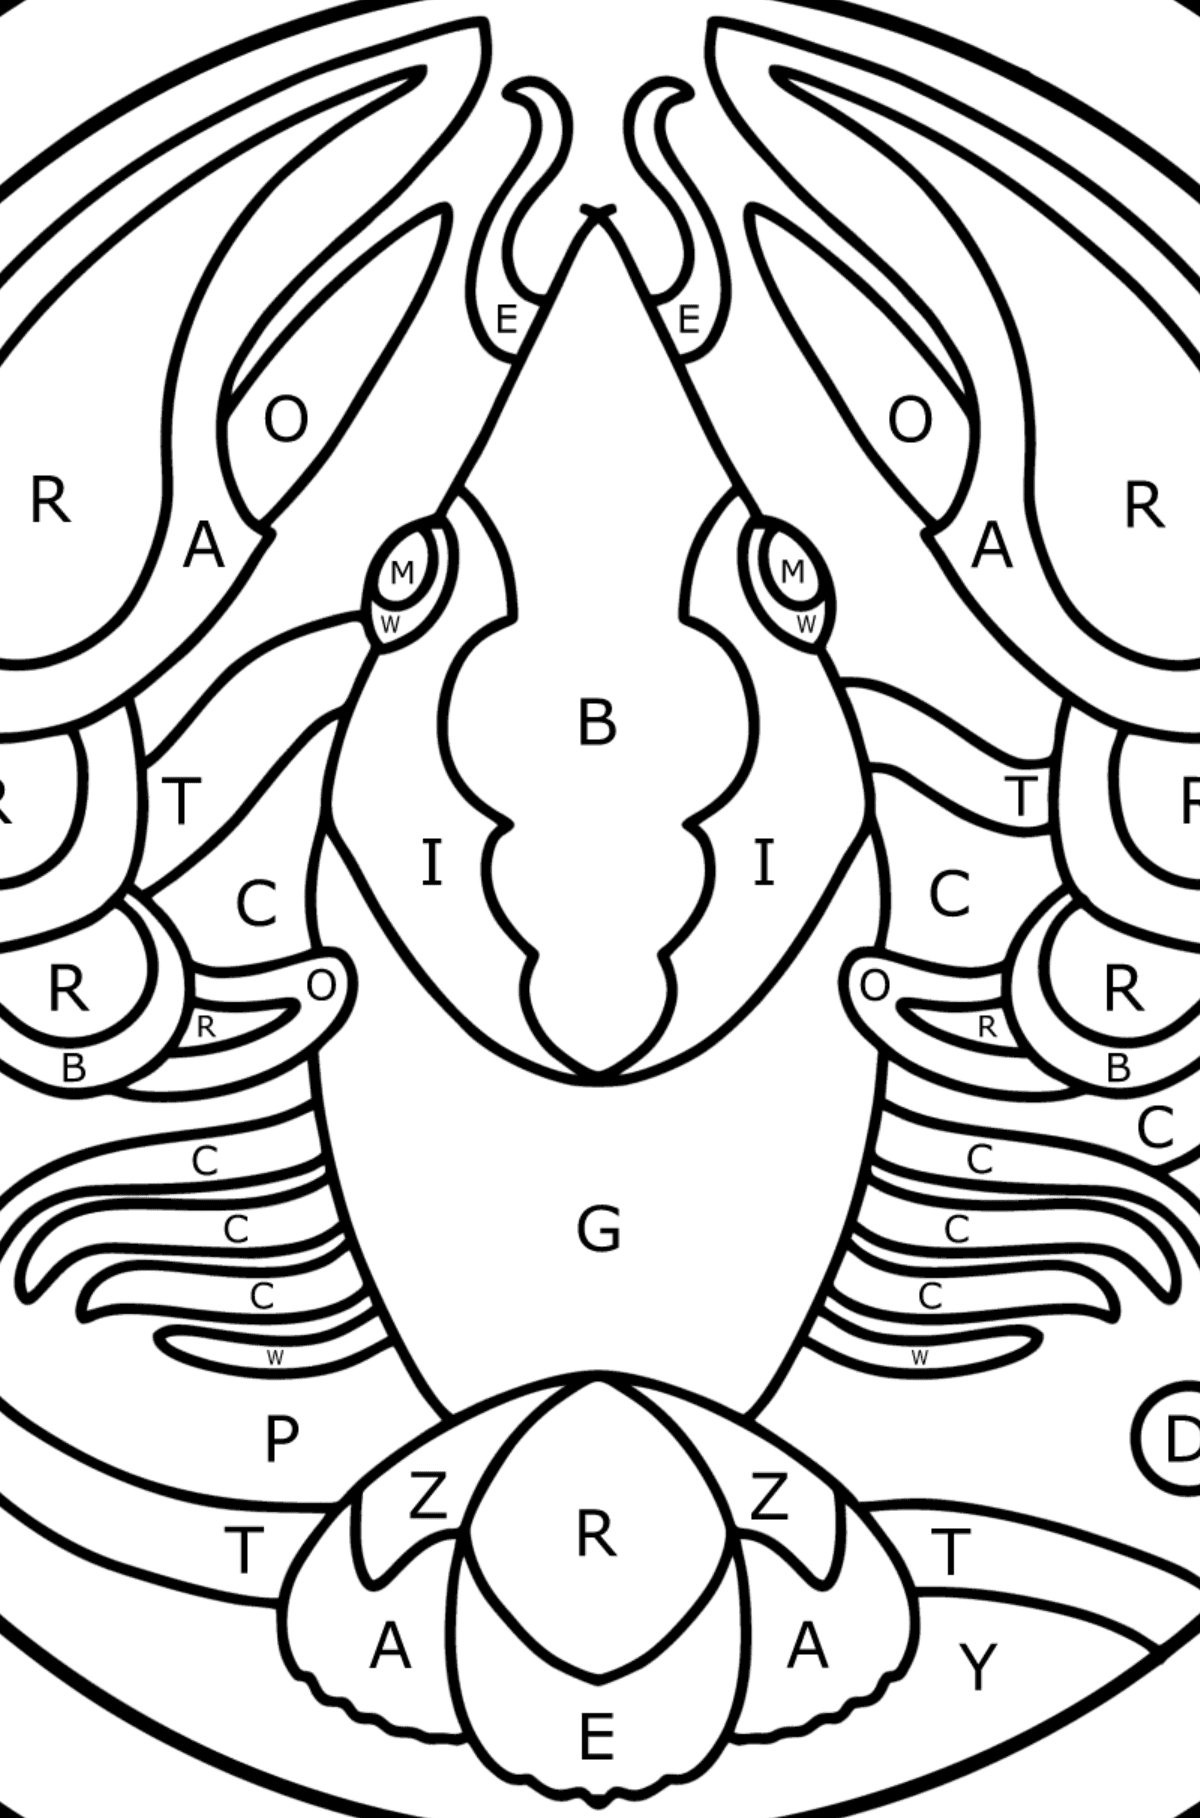 Coloring page for kids - Cancer zodiac sign - Coloring by Letters for Kids